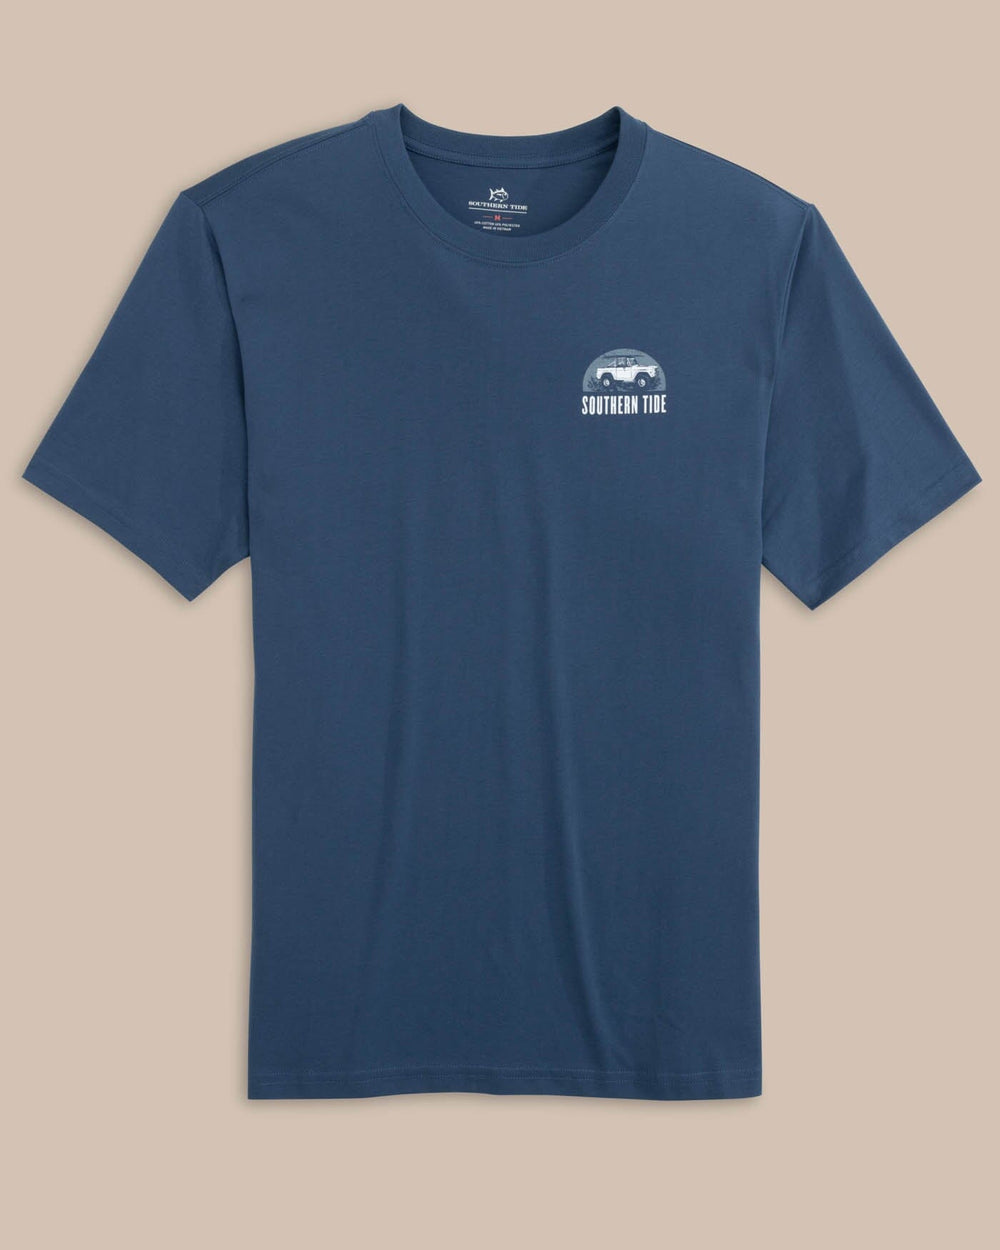 The front view of the Southern Tide Catch Me on the Coast Short Sleeve T-shirt by Southern Tide - Aged Denim